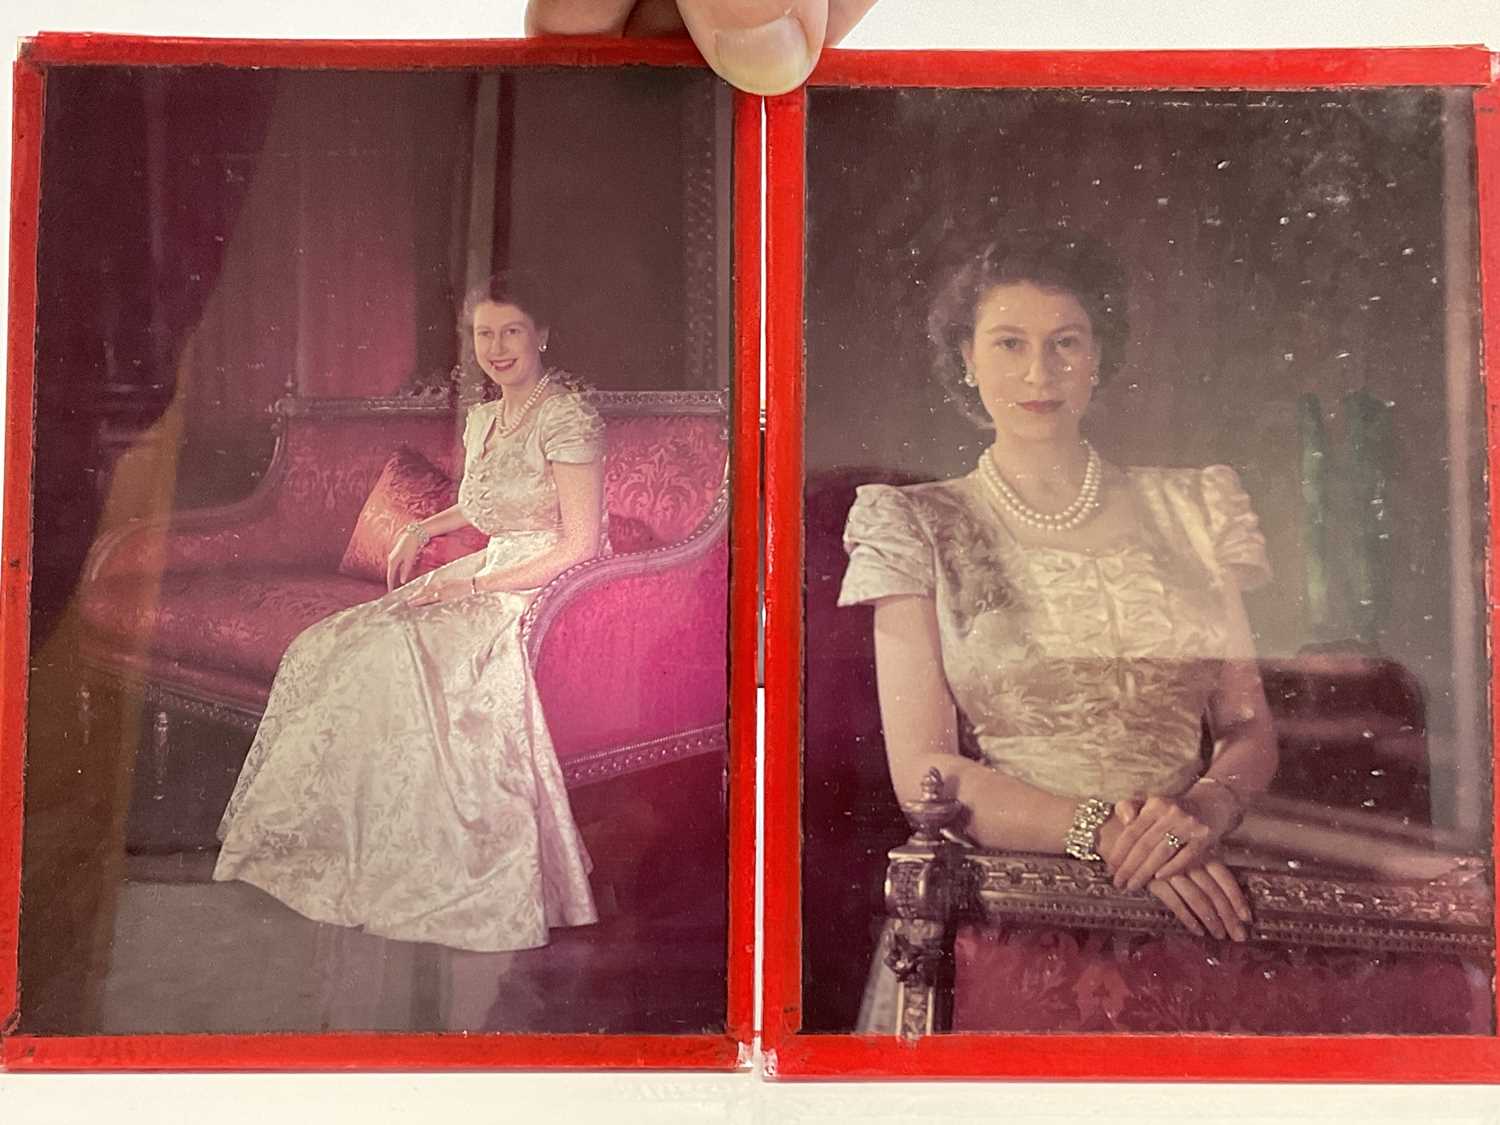 Lot 36 - Two early 1950s colour glass negatives of H.R.H. Princess Elizabeth (later H.M. Queen Elizabeth II) in a ball gown taken at Buckingham Palace - each 17cm x 12cm